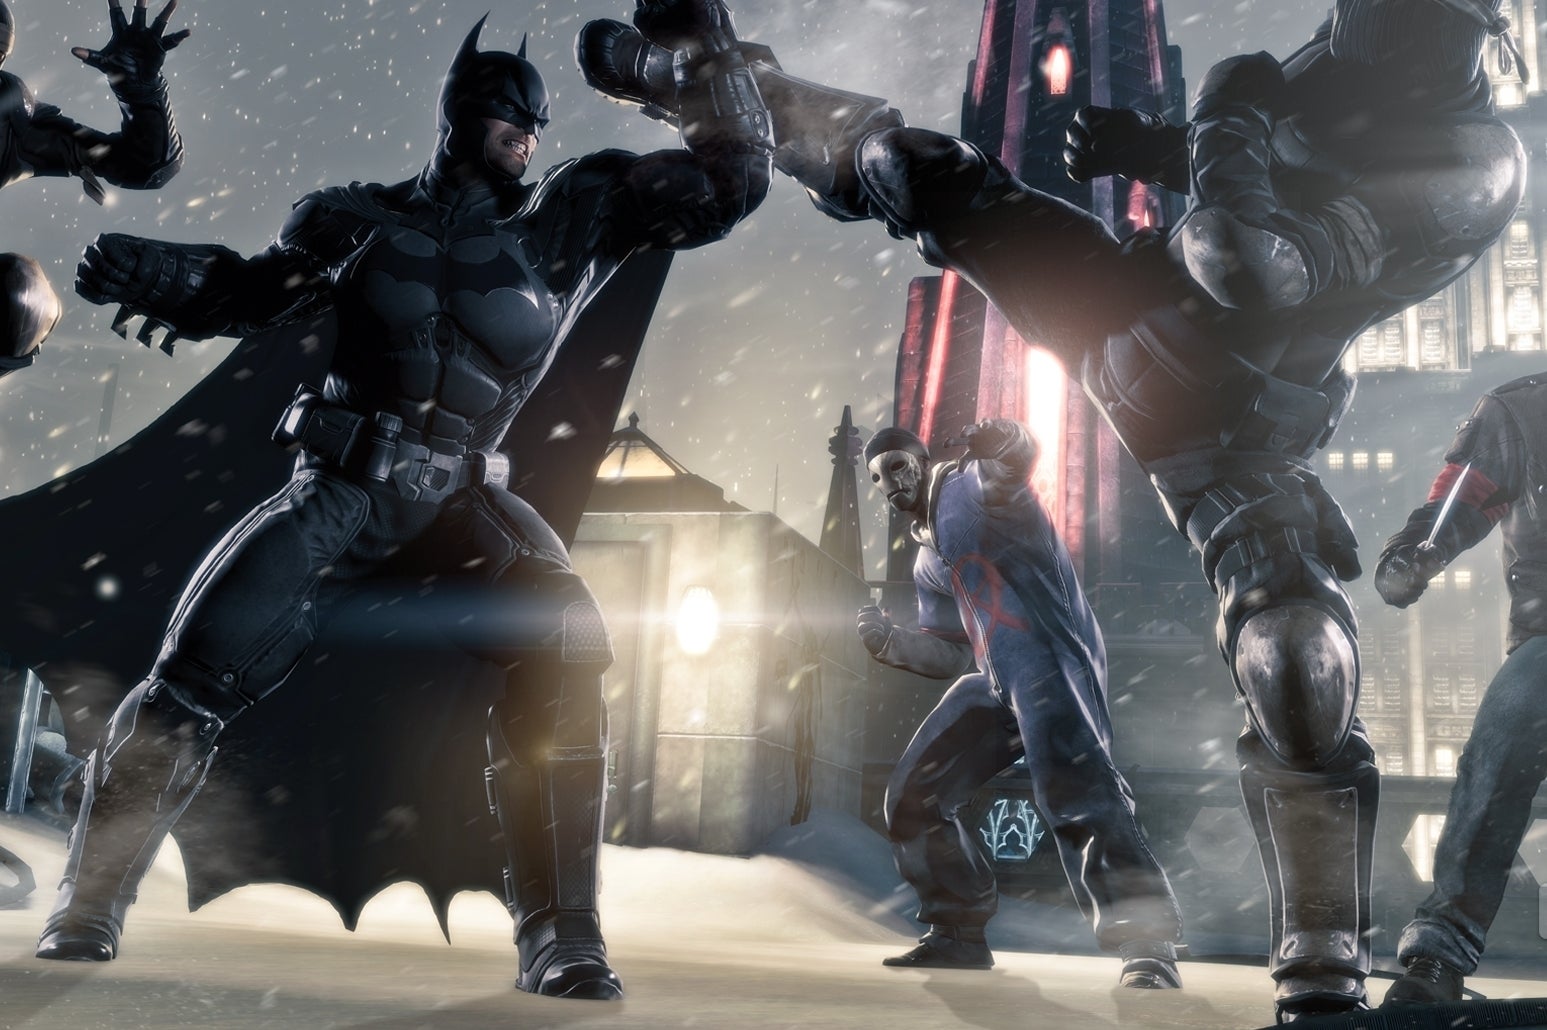 Image for Turns out Kevin Conroy is working on Batman: Arkham Origins after all